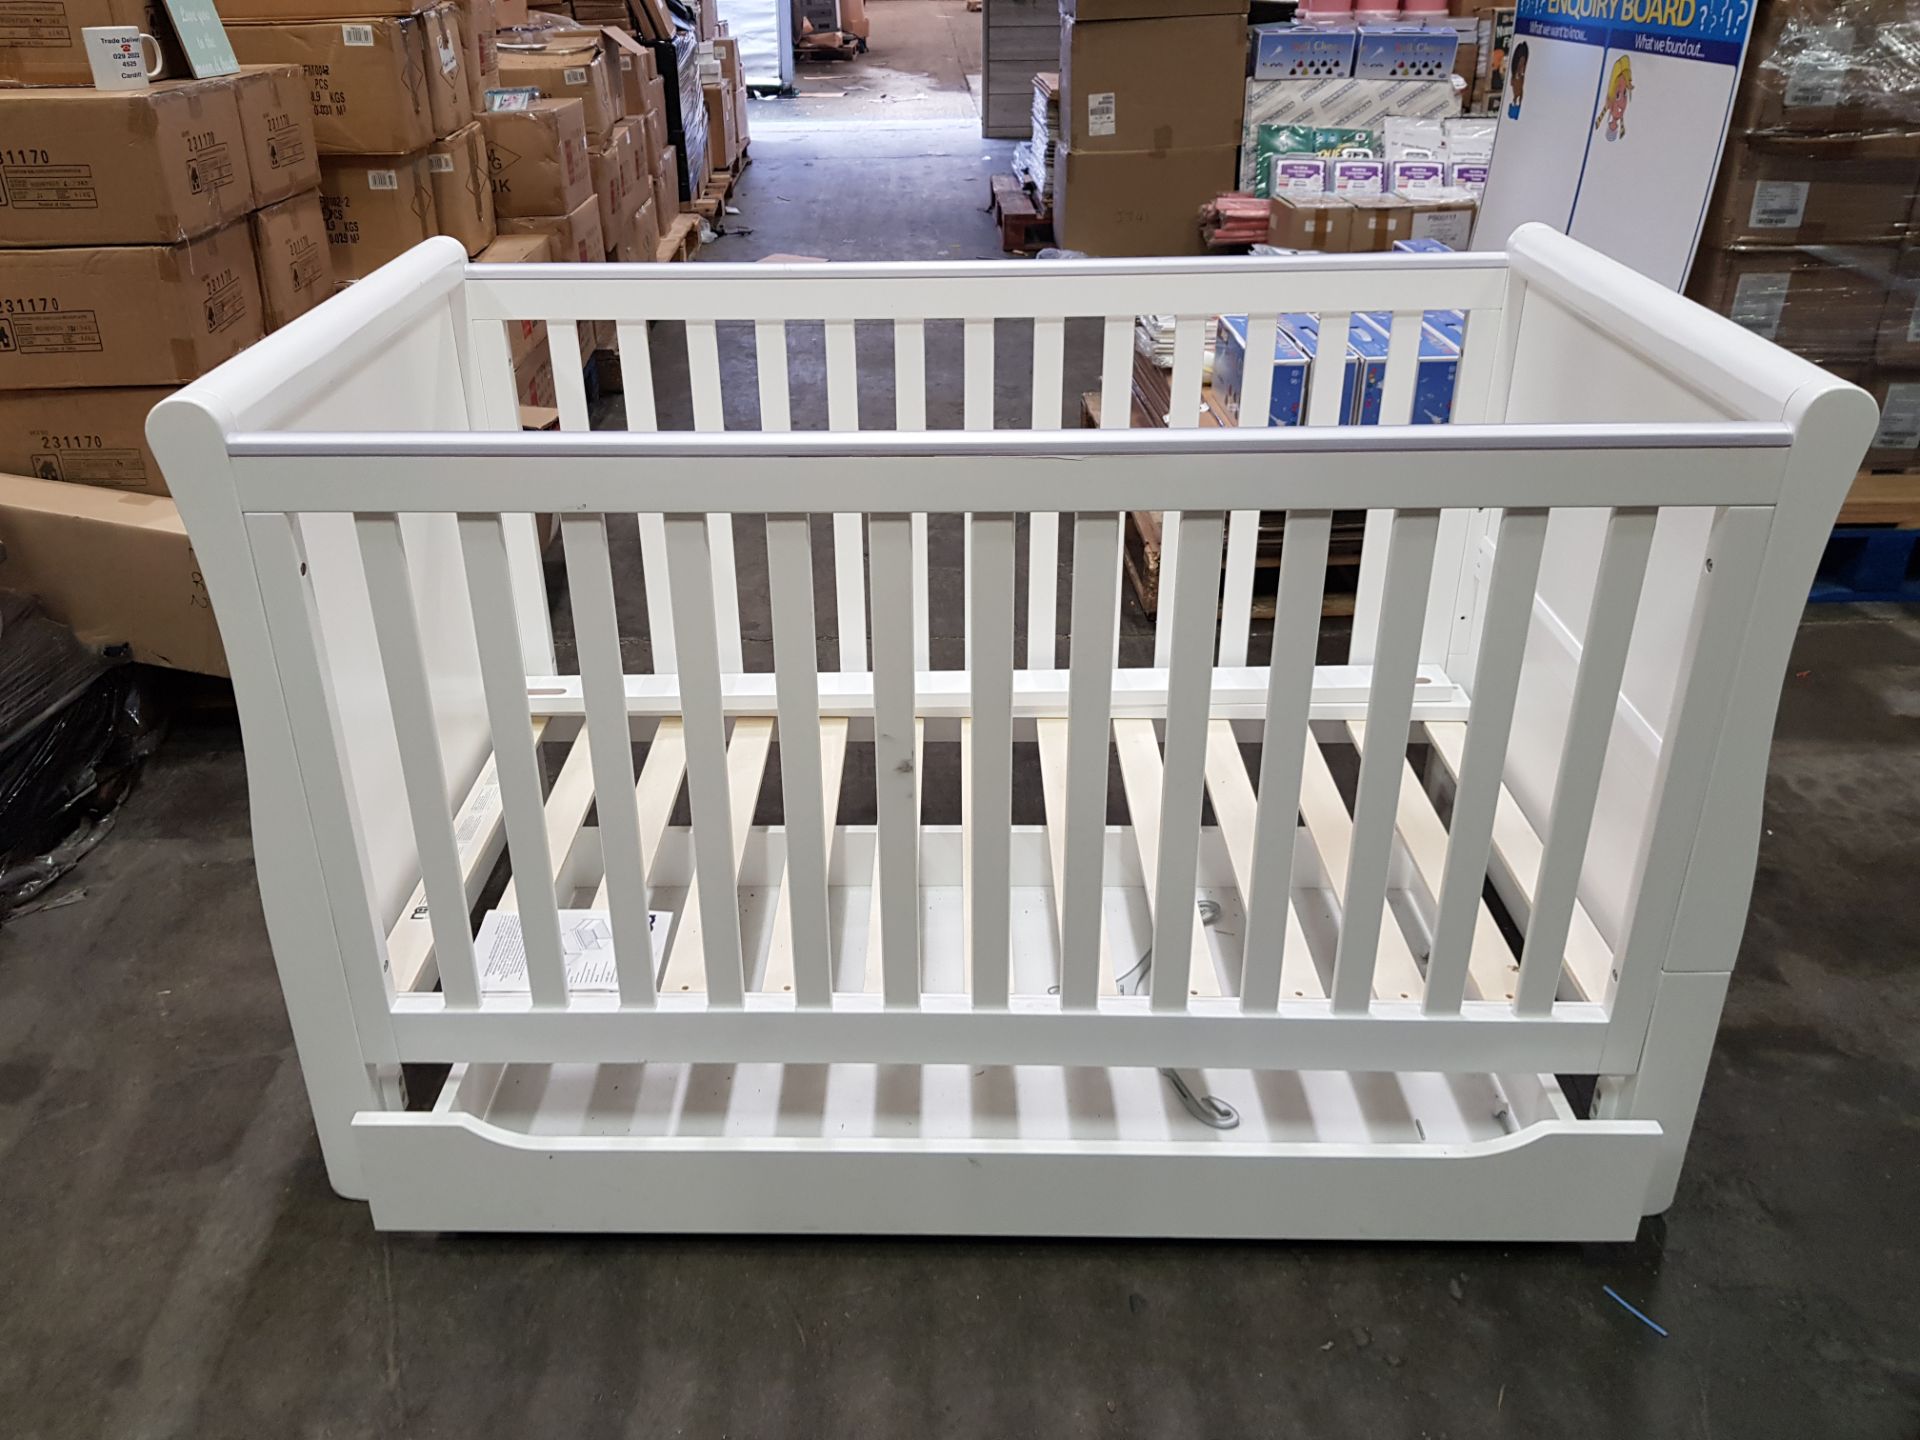 BRAND NEW MOTHERCARE HIGH GLOSS WHITE SLEIGH COT BED WITH STORAGE DRAWER - (KB488) - RRP £299 - IN 2